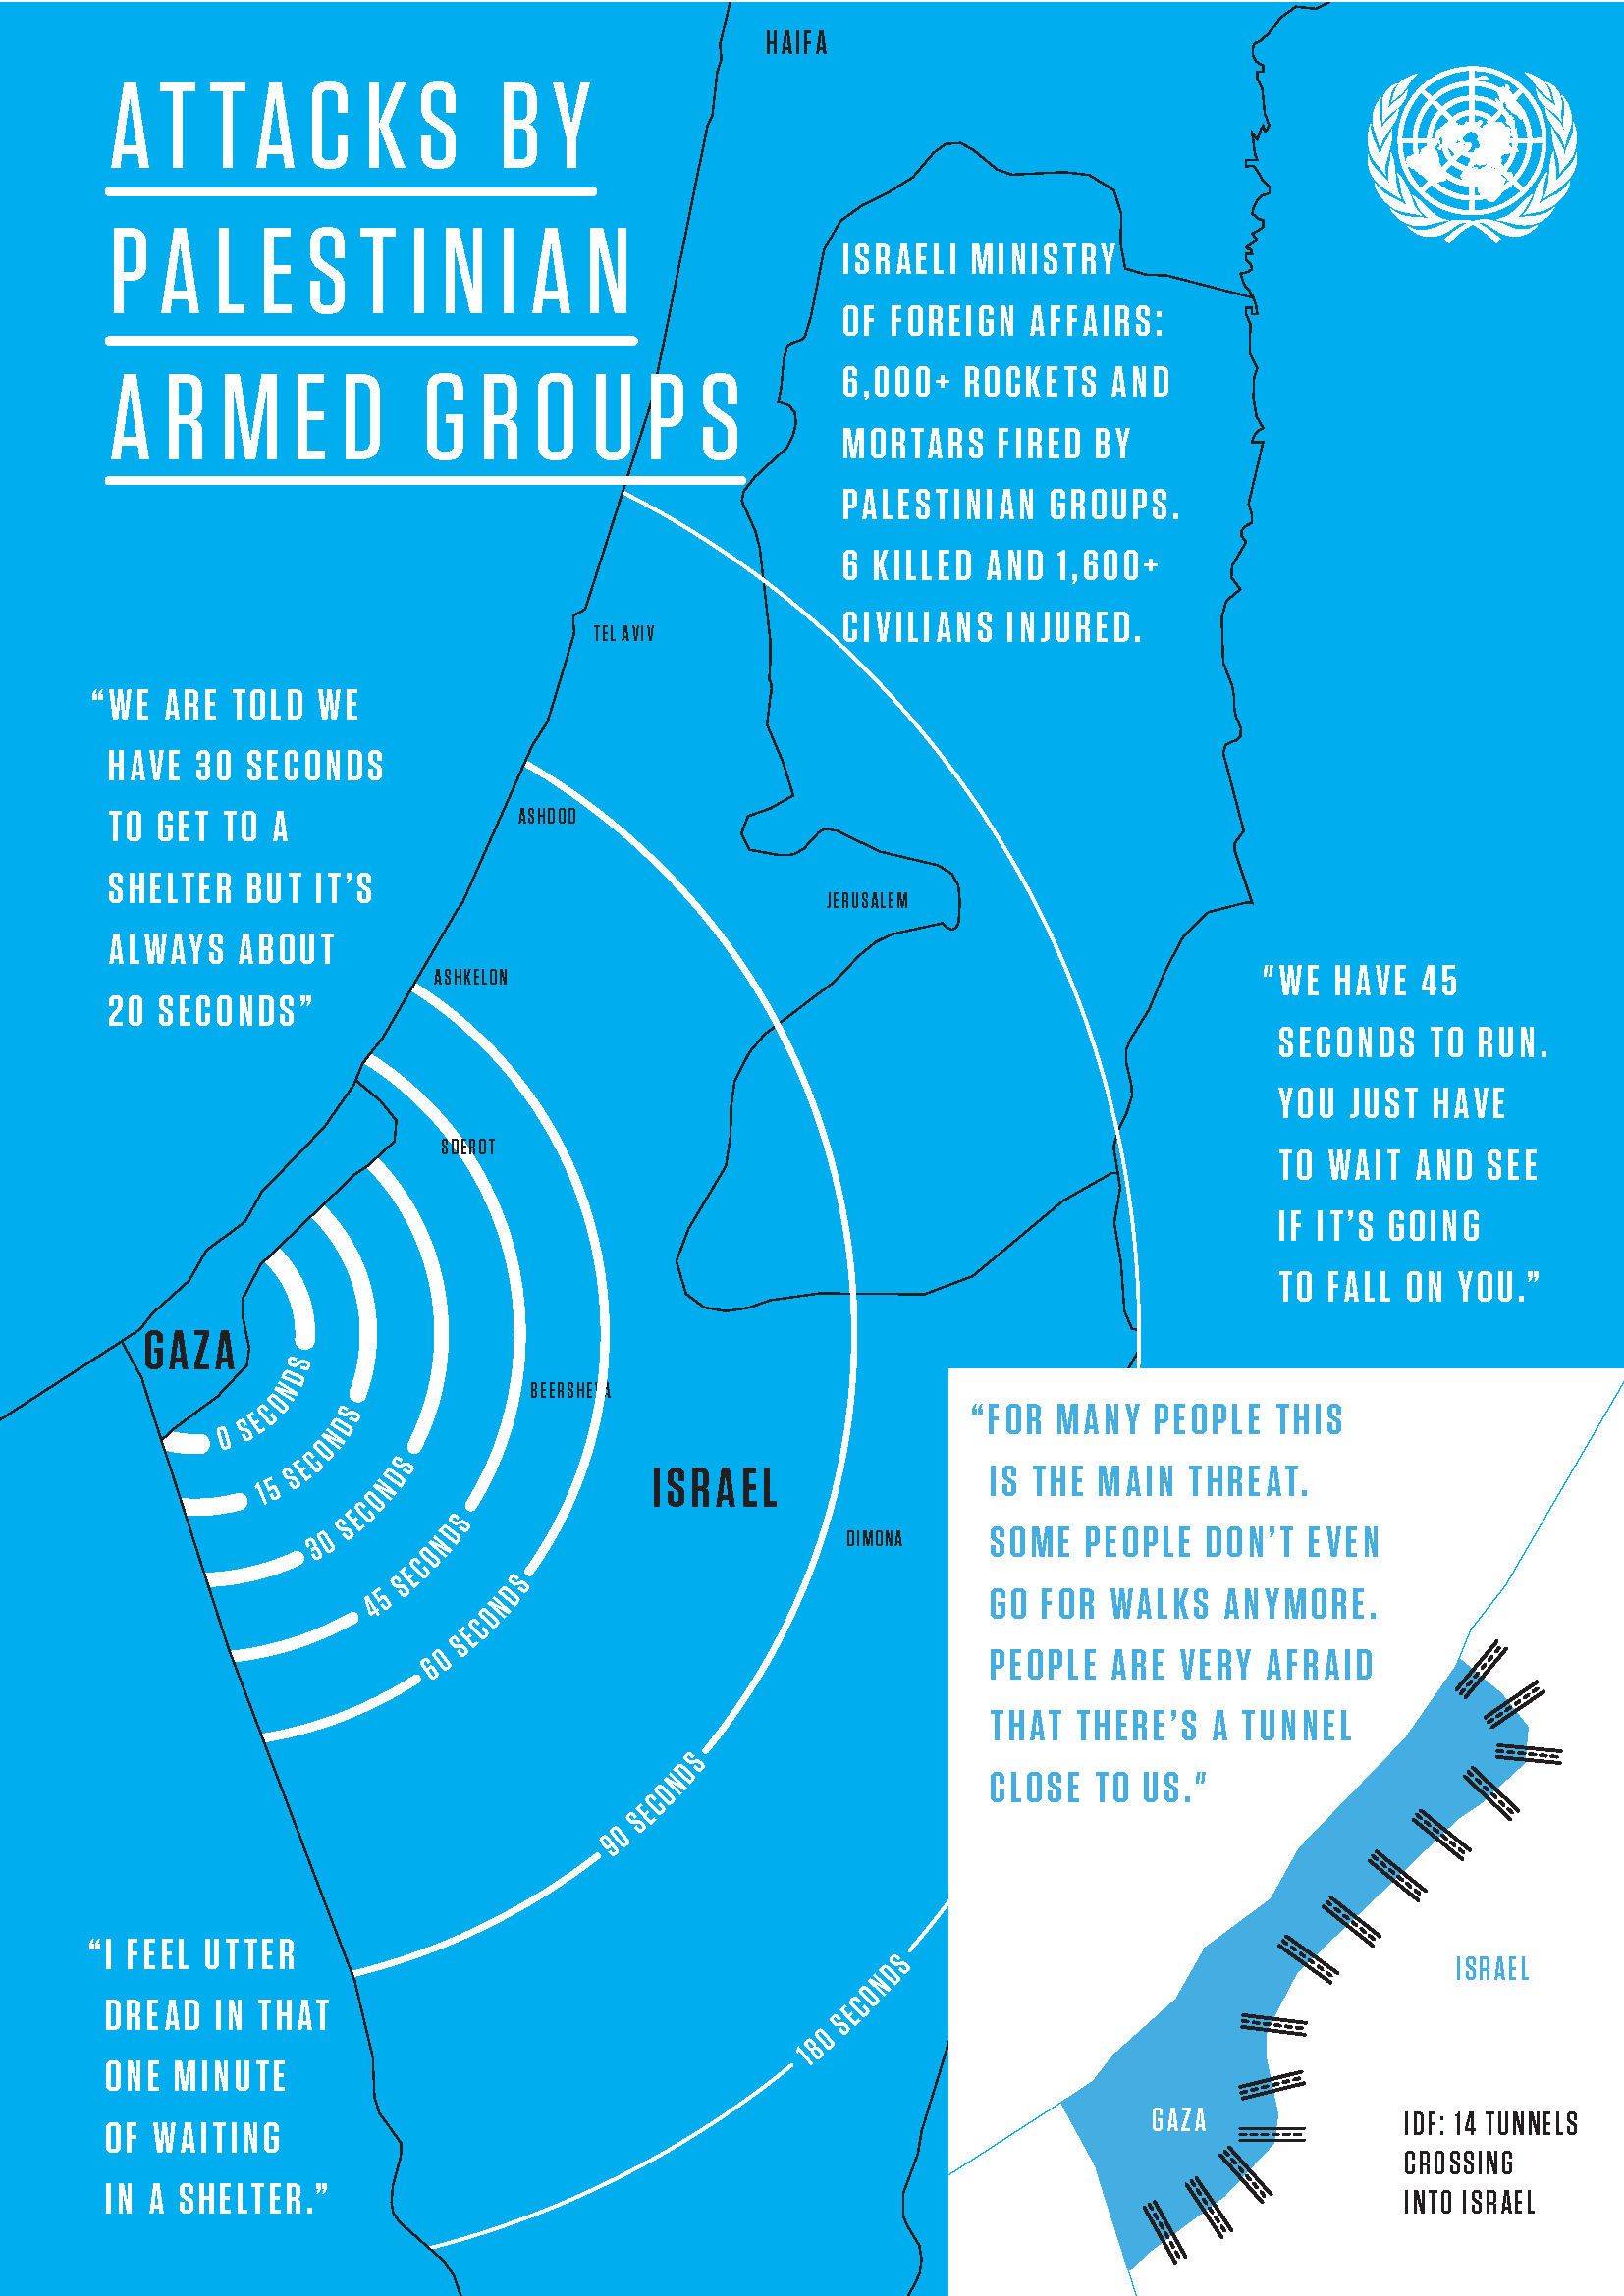 Attacks by Palestinian armed groups